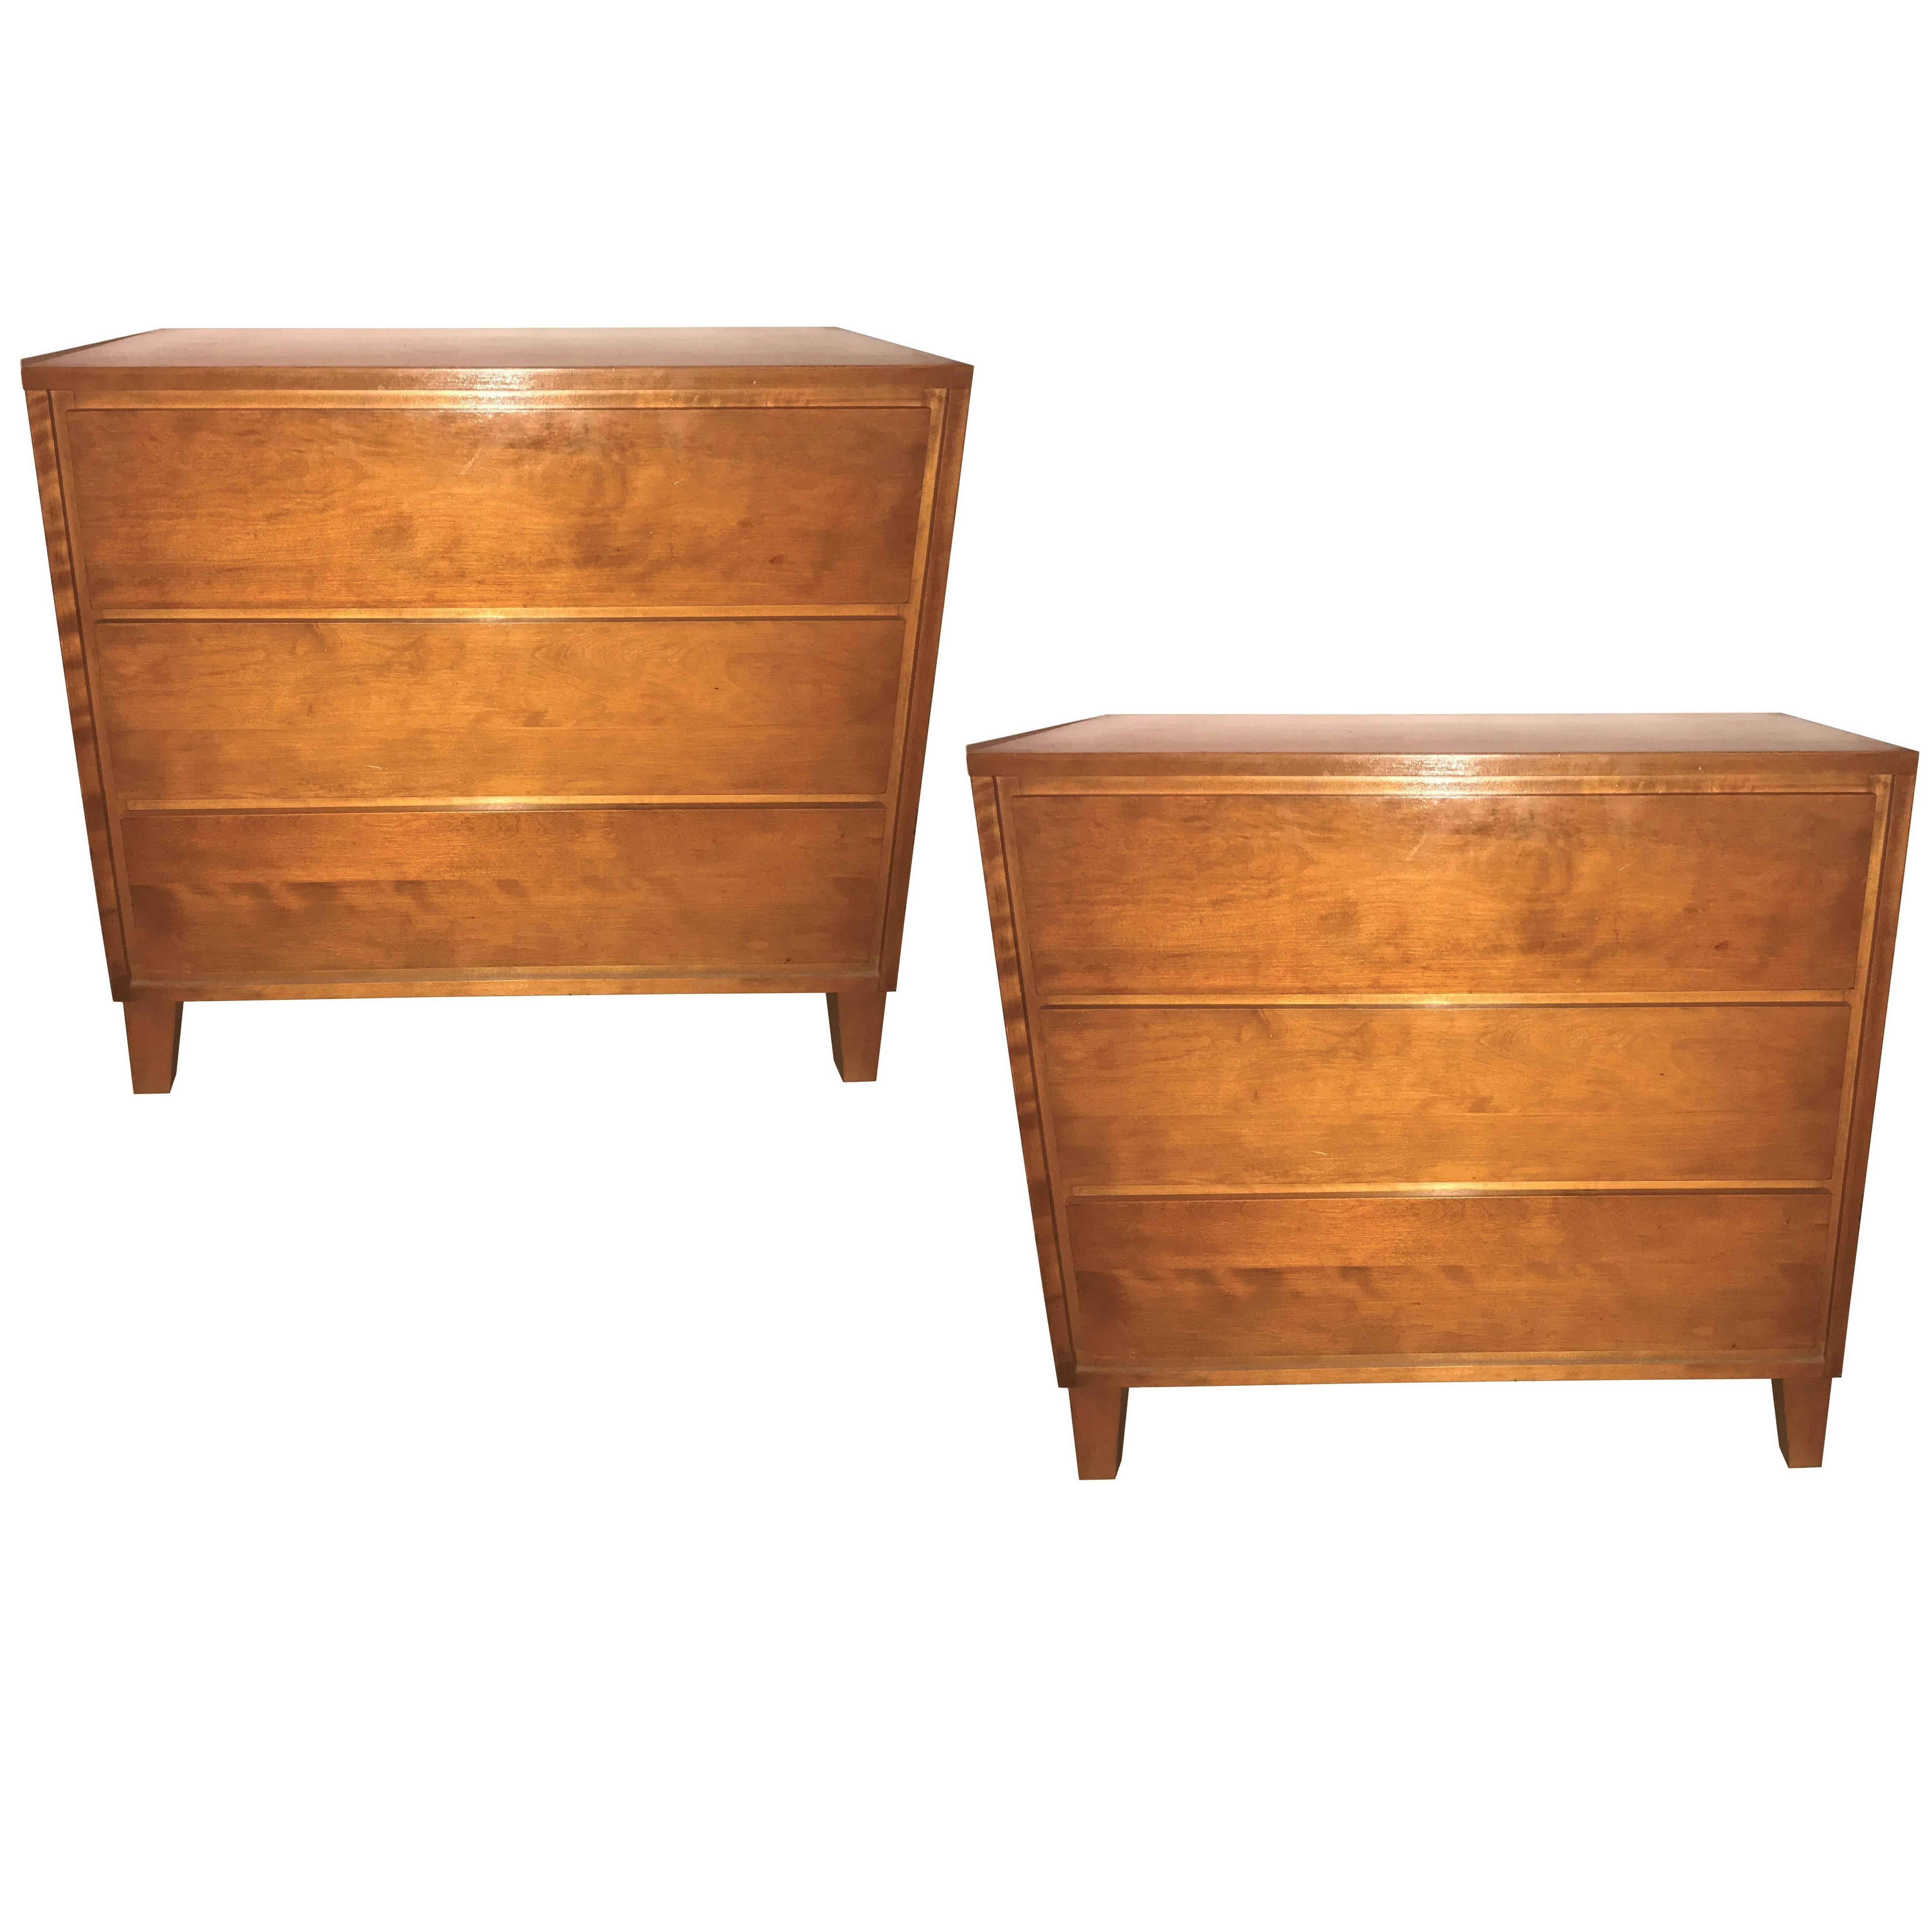 Pair of Custom Chests, Commodes or Nightstands by Conant Ball Makers